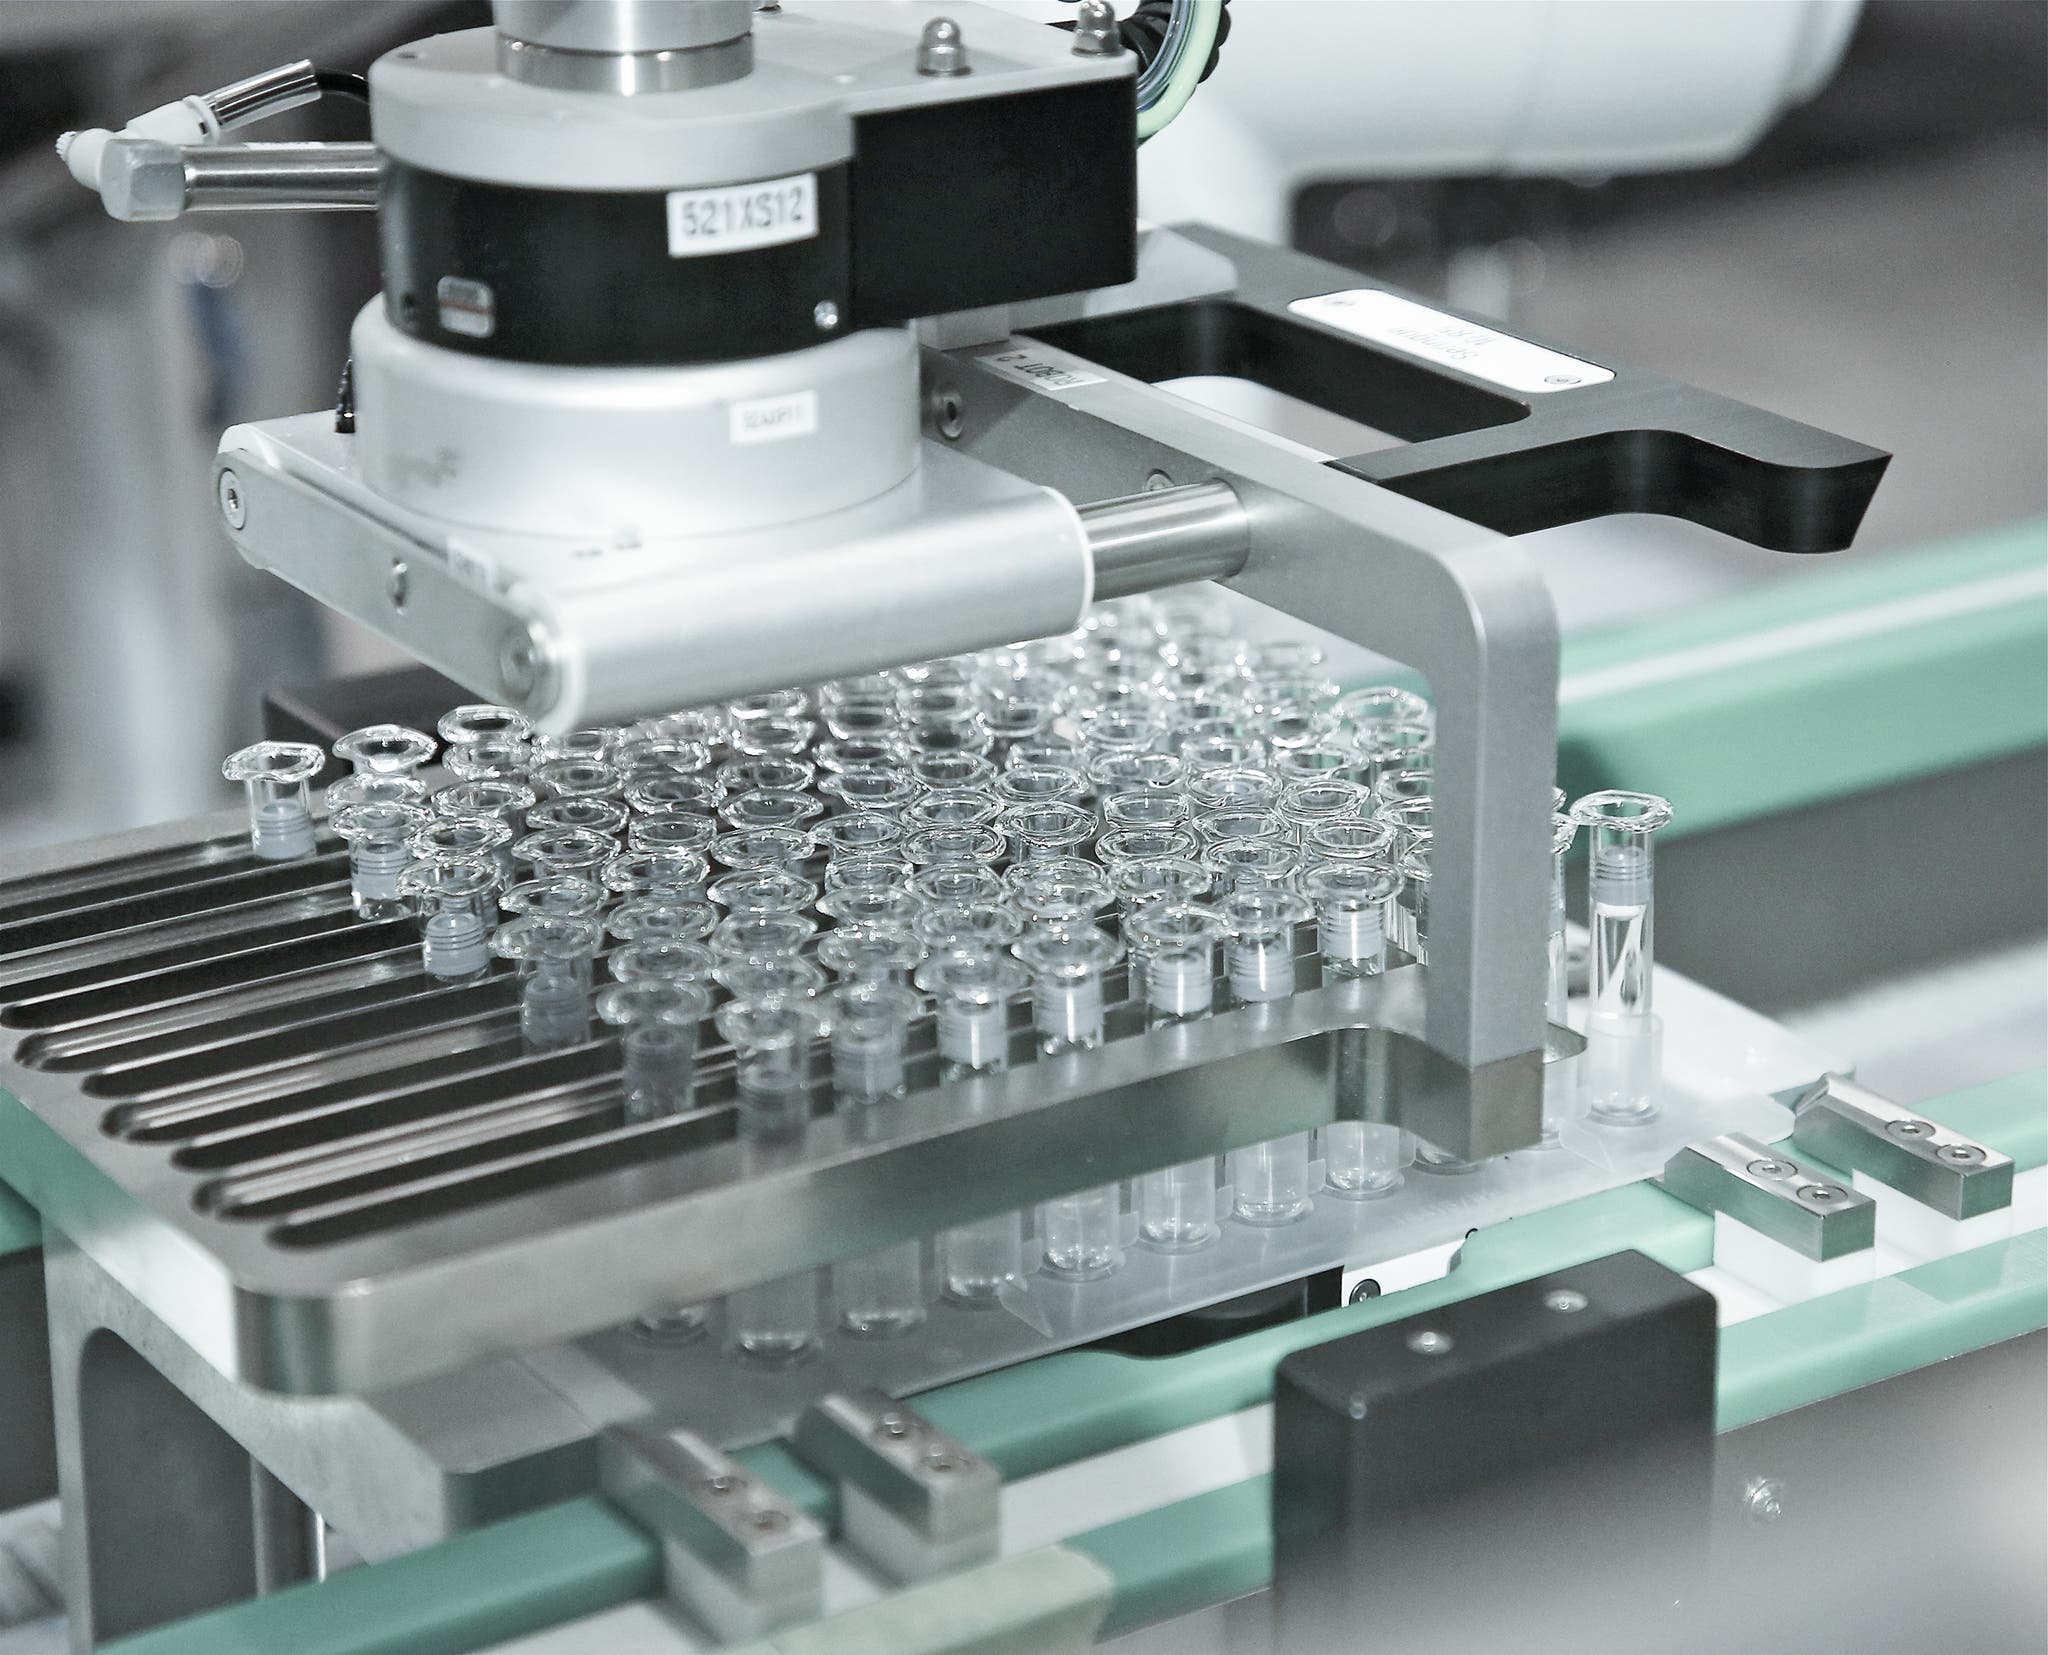 Fully automated inspection and filling of syringes